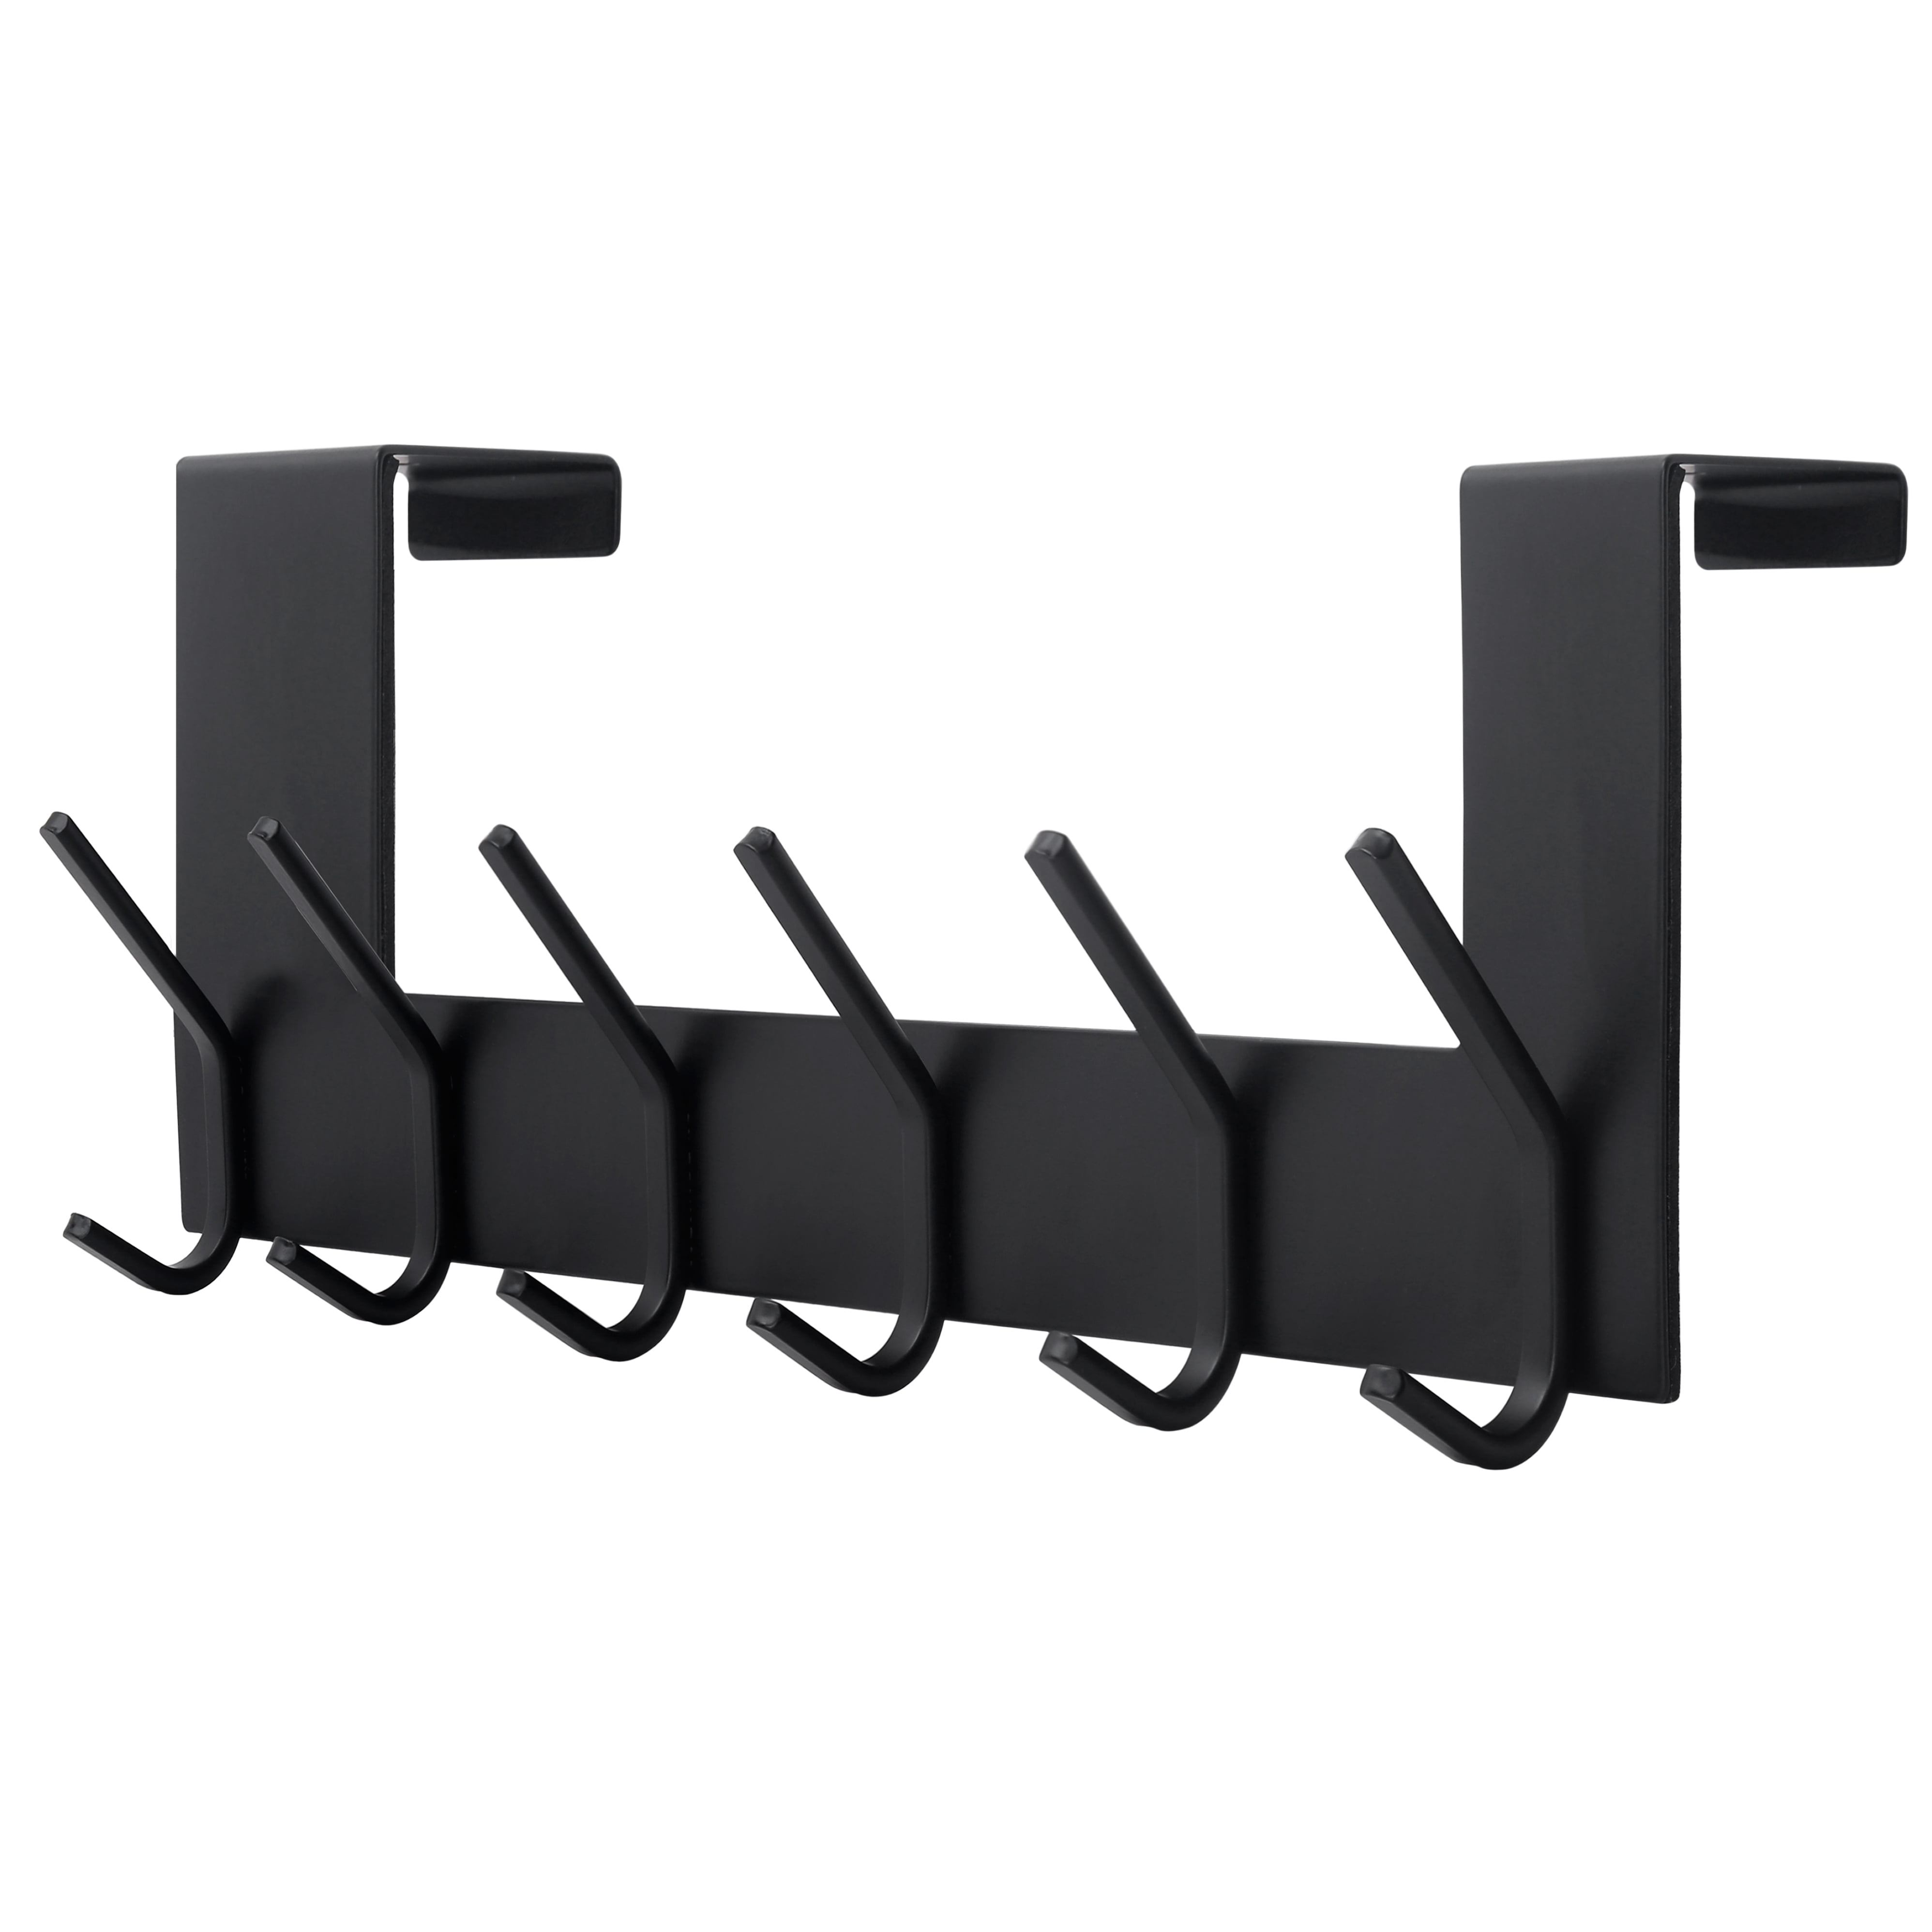 Dseap over the Door Hooks,Sturdy Towel Rack with 6-dual Hooks